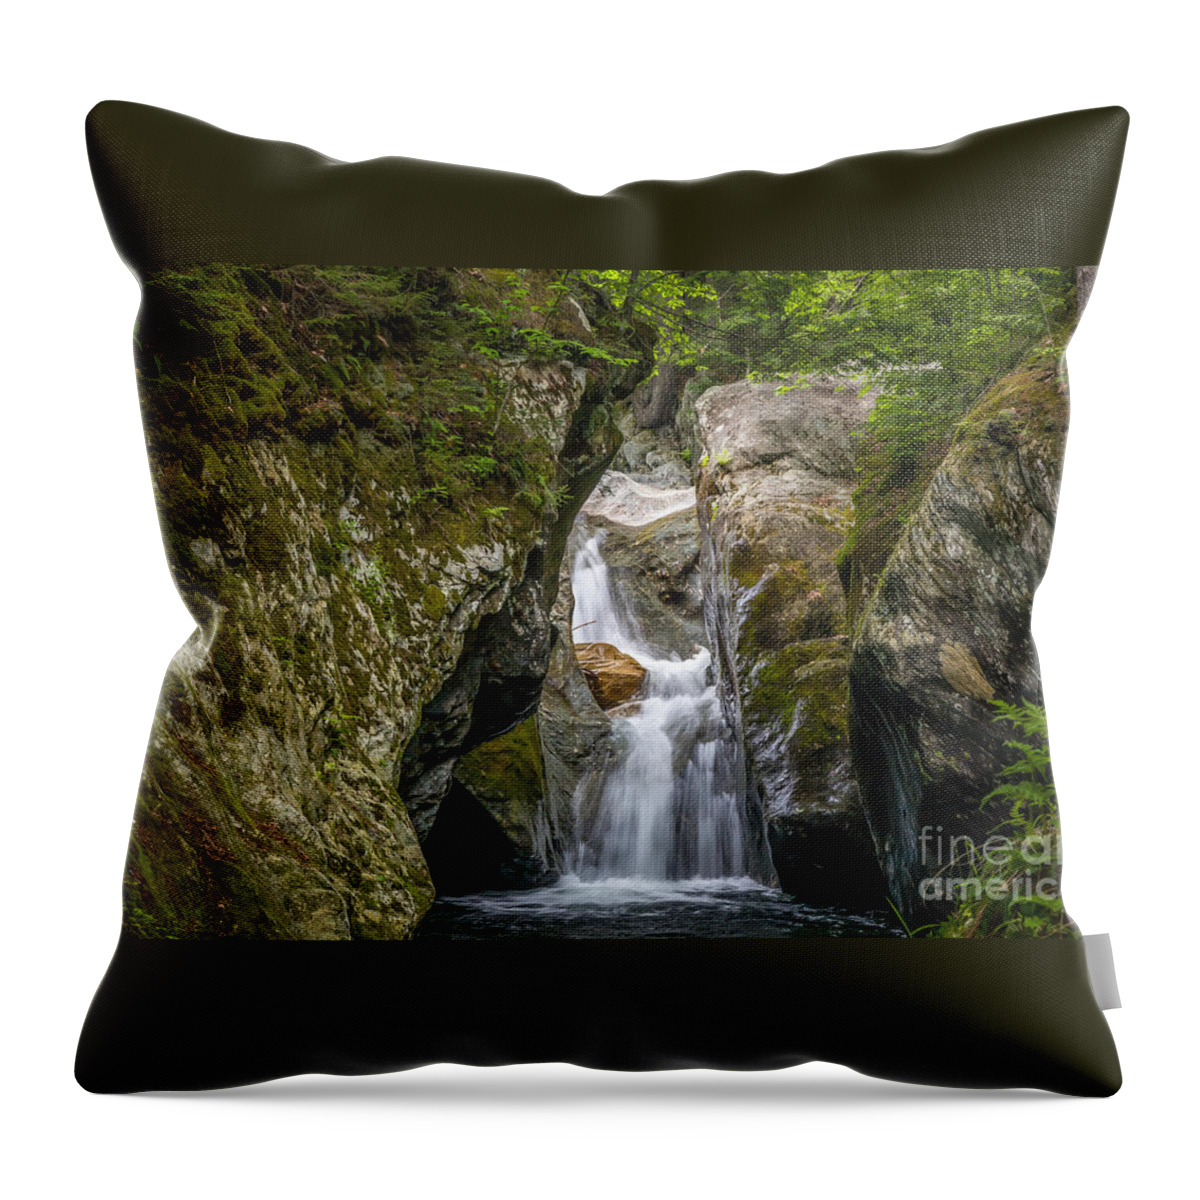 America Throw Pillow featuring the photograph Texas Falls Vermont by Susan Cole Kelly